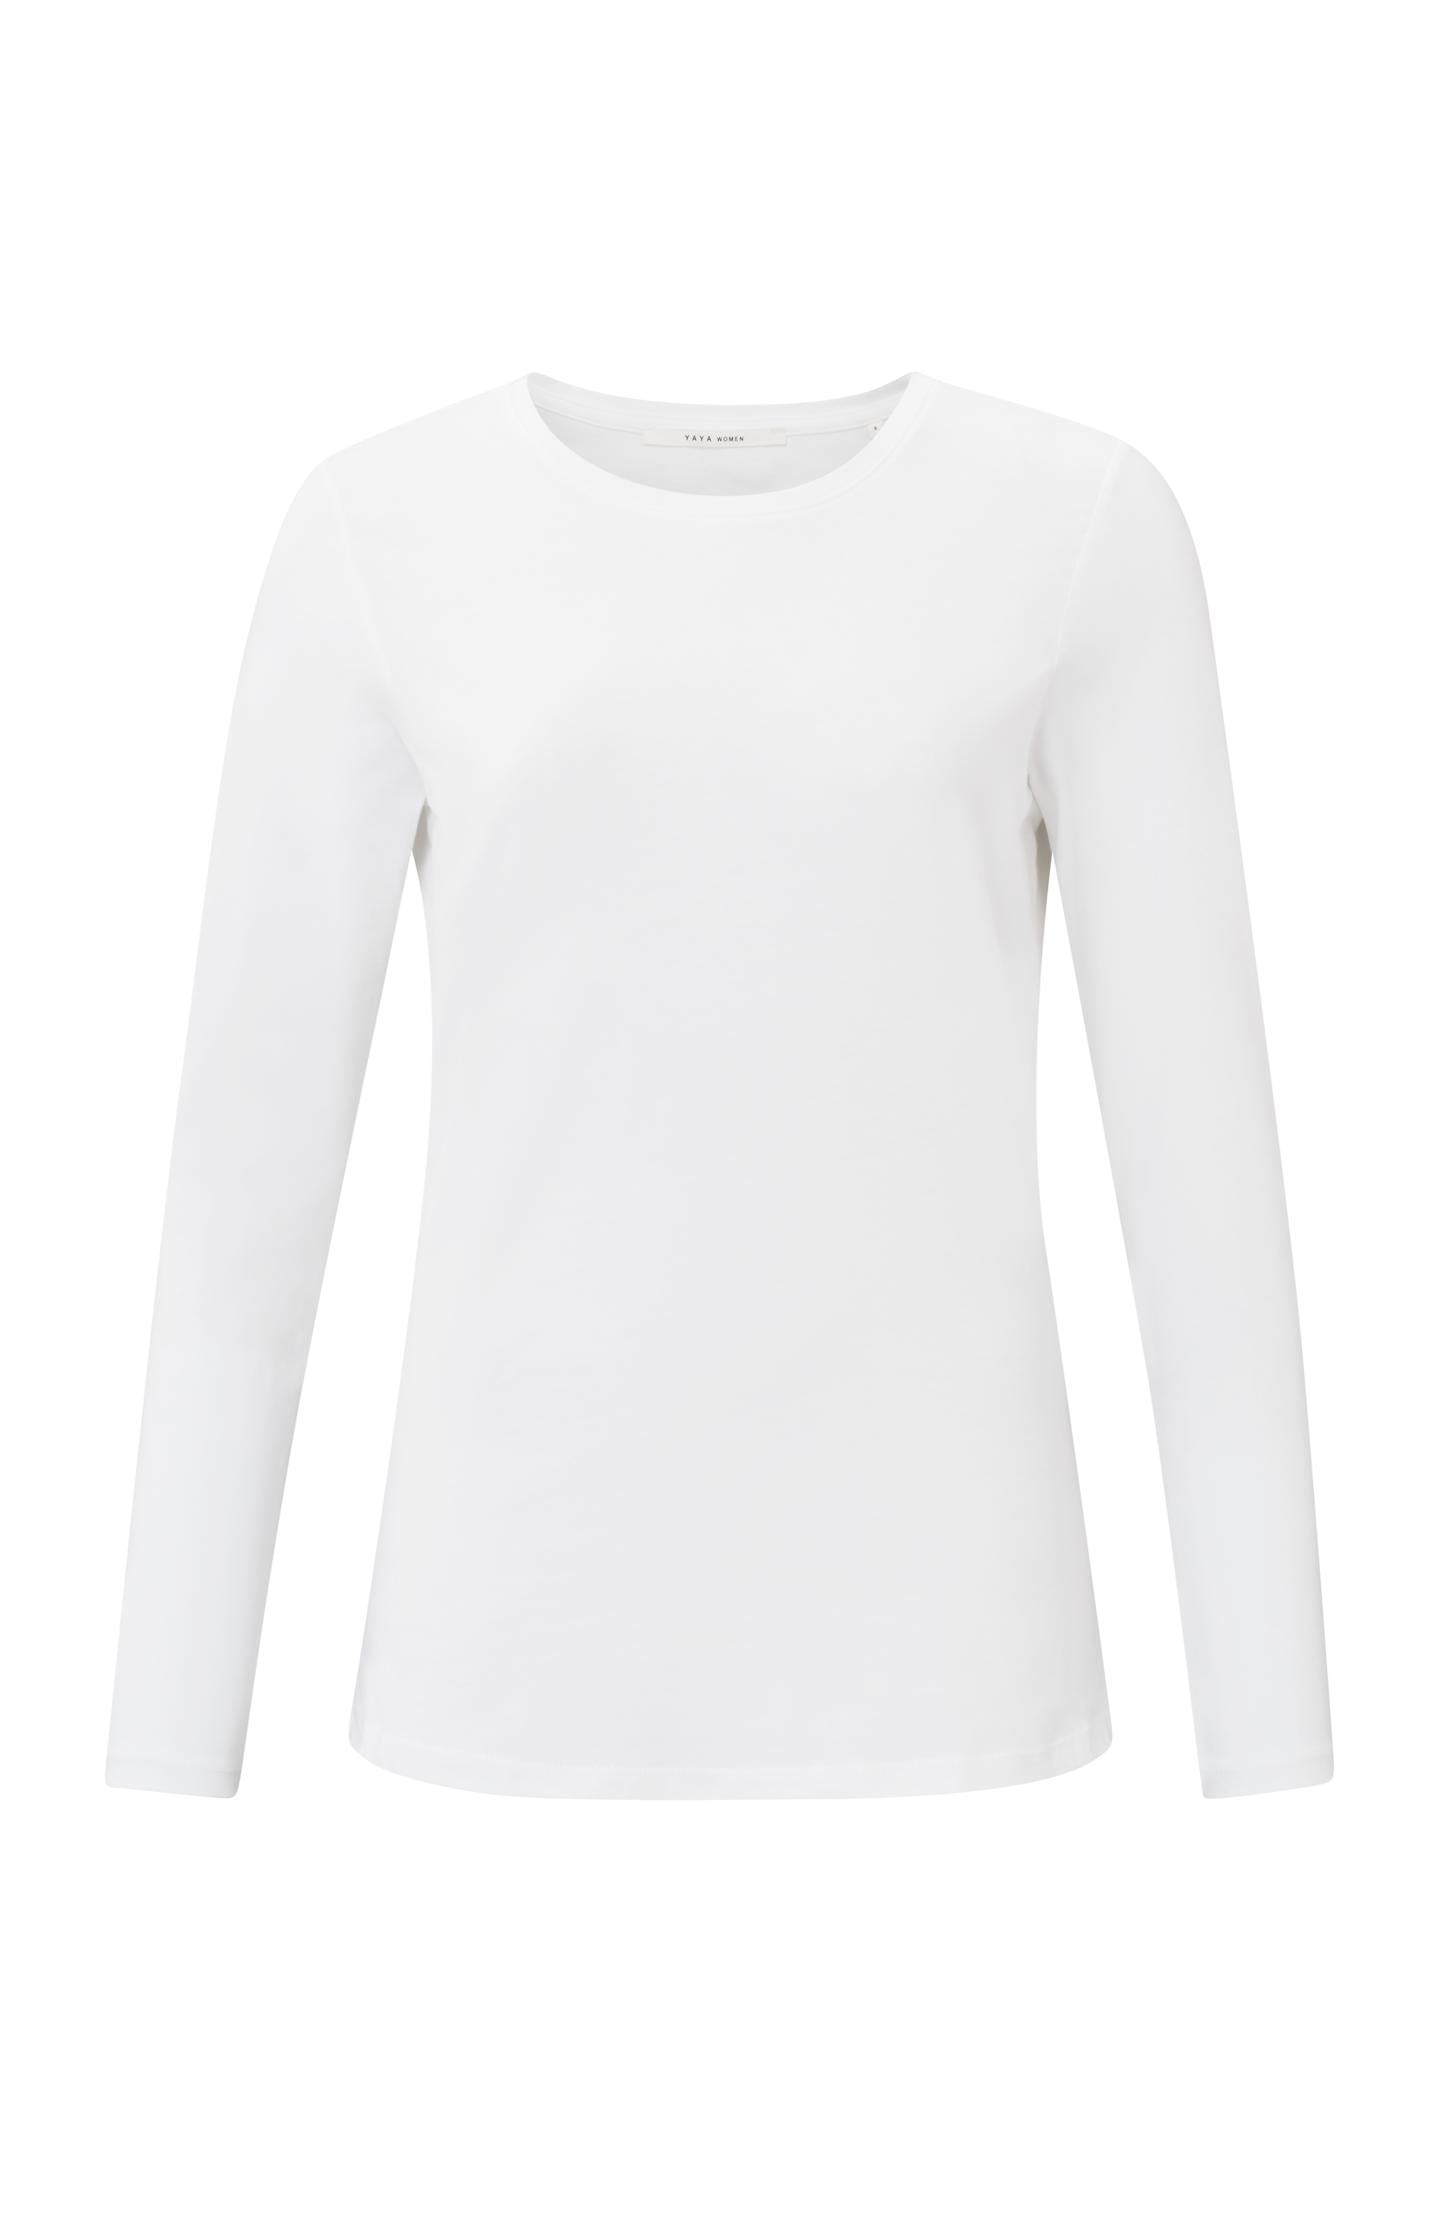 T-shirt with round neck and long sleeves in a regular fit - Type: product